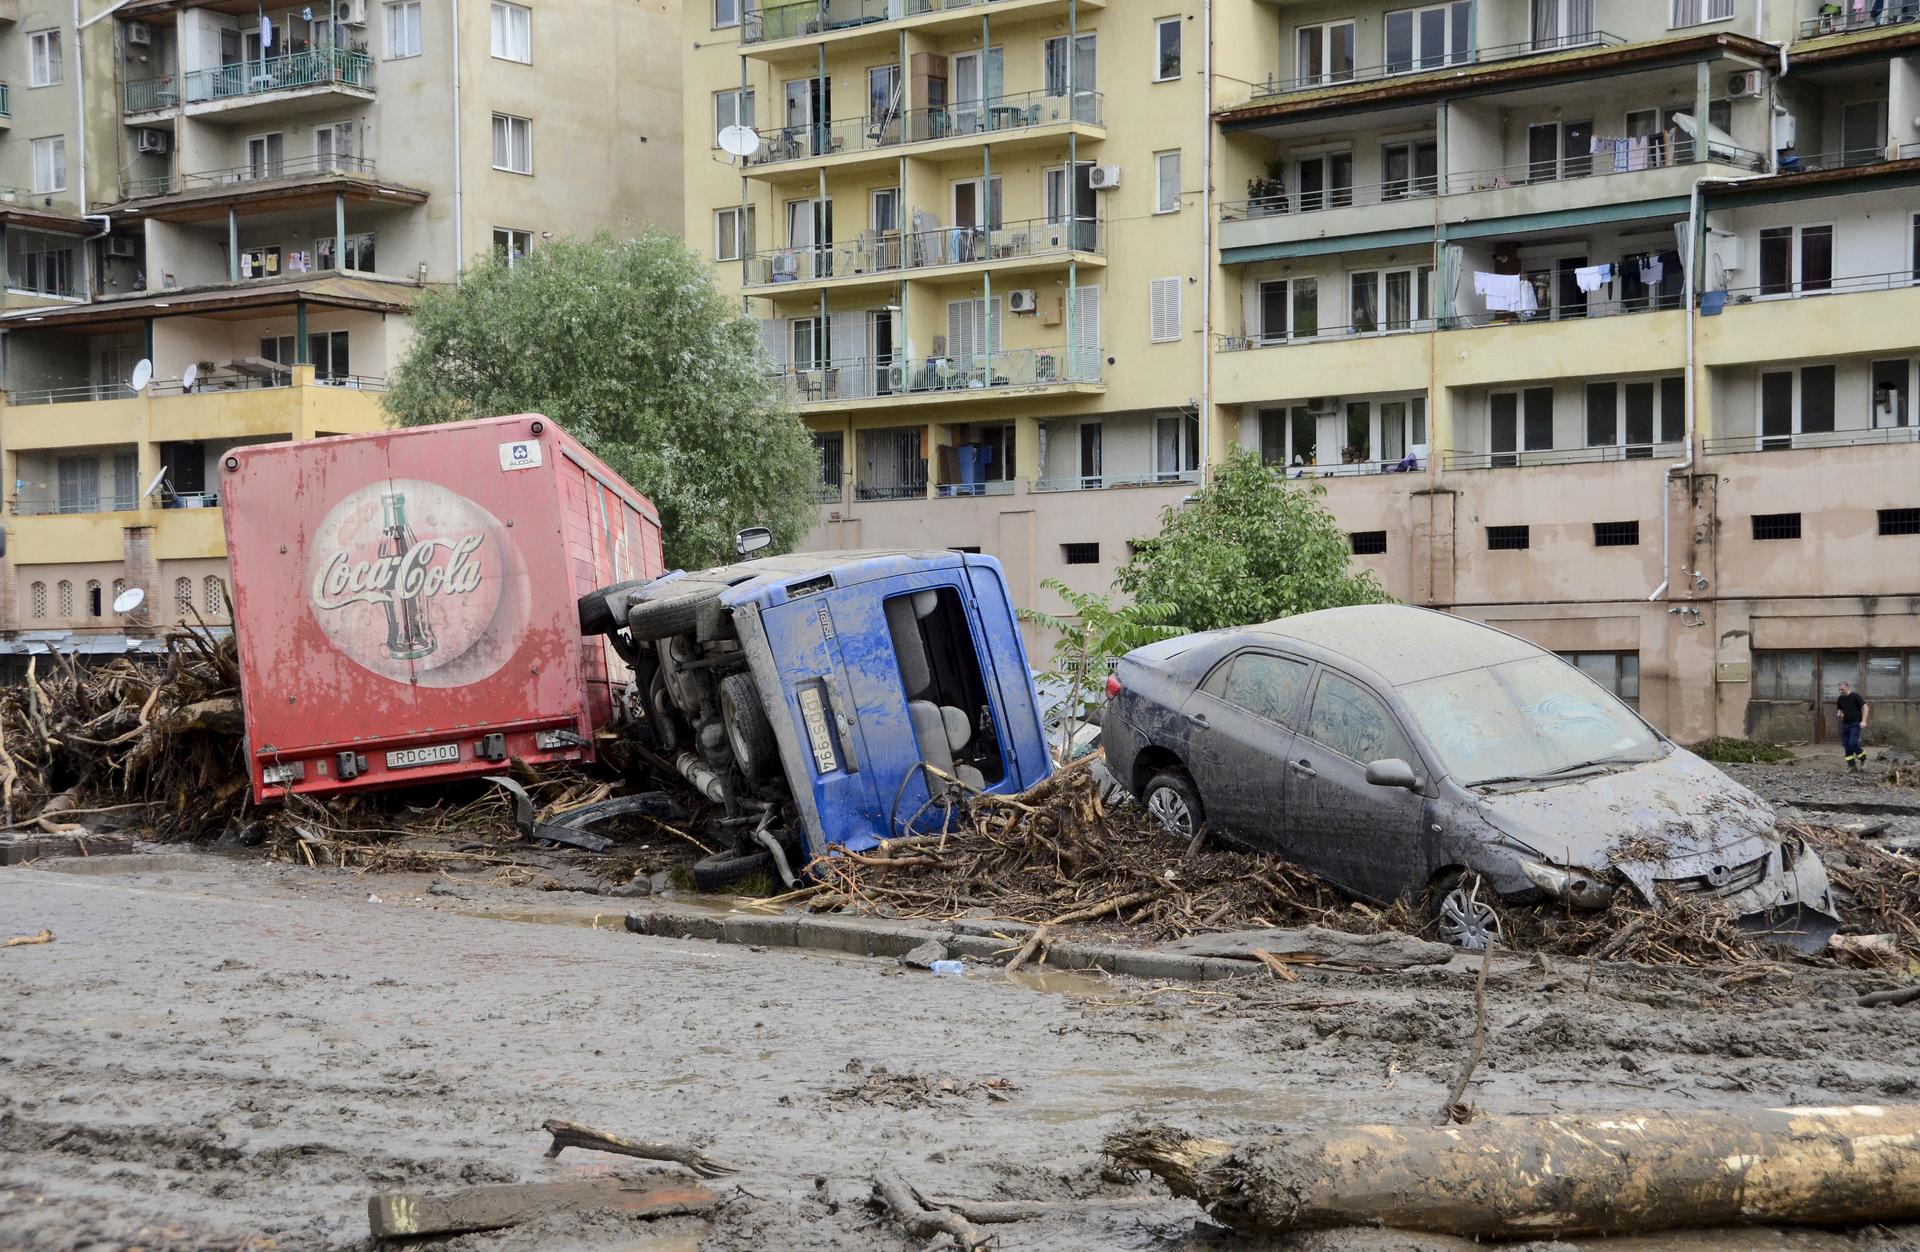 Heavy rainfall turned the Vere river flowing through Tbilisi, Georgia into a torrent that swept away dozens of buildings and cars, June 14, 2015. At least a dozen people died as a result of flooding and mudslides in the Georgian capital.  